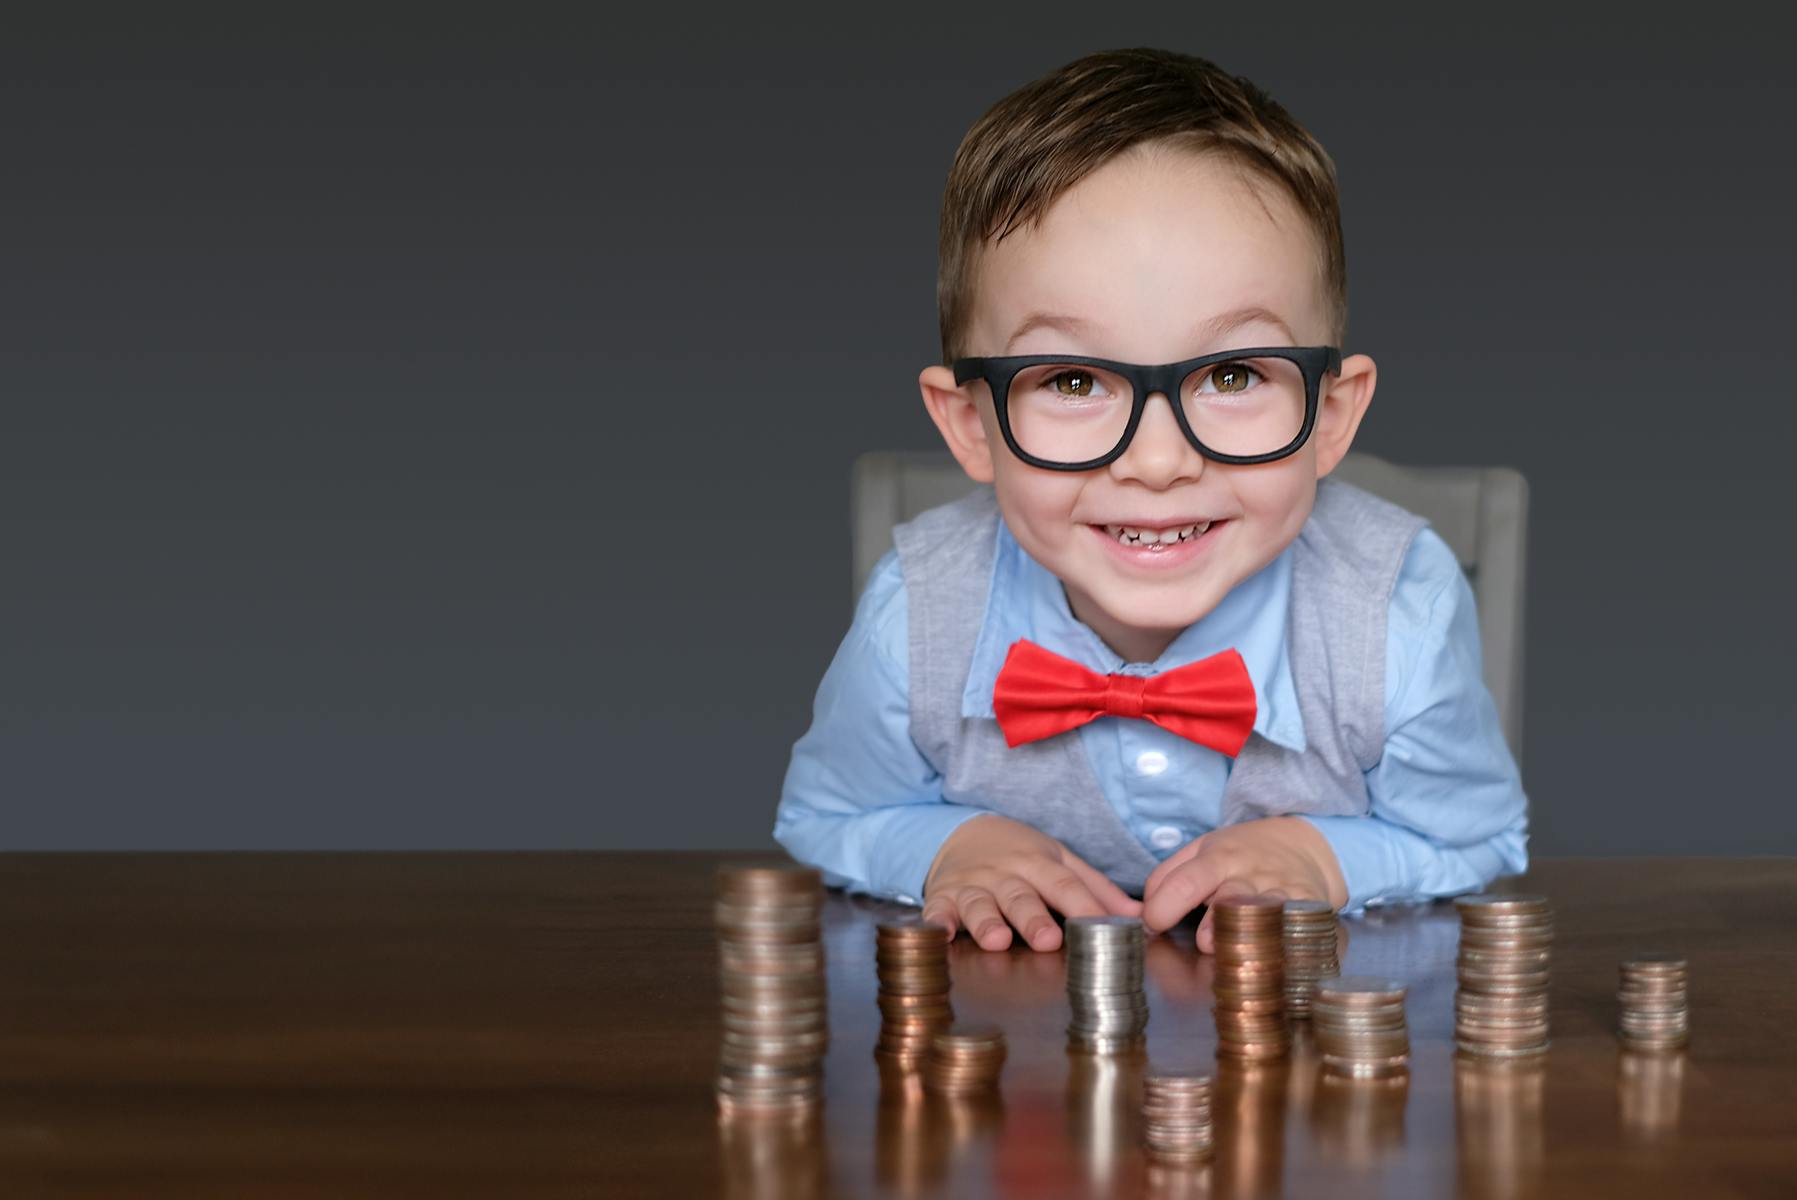 Cute kid in a bow tie and glasses smiling behind a desk with stacks of coins